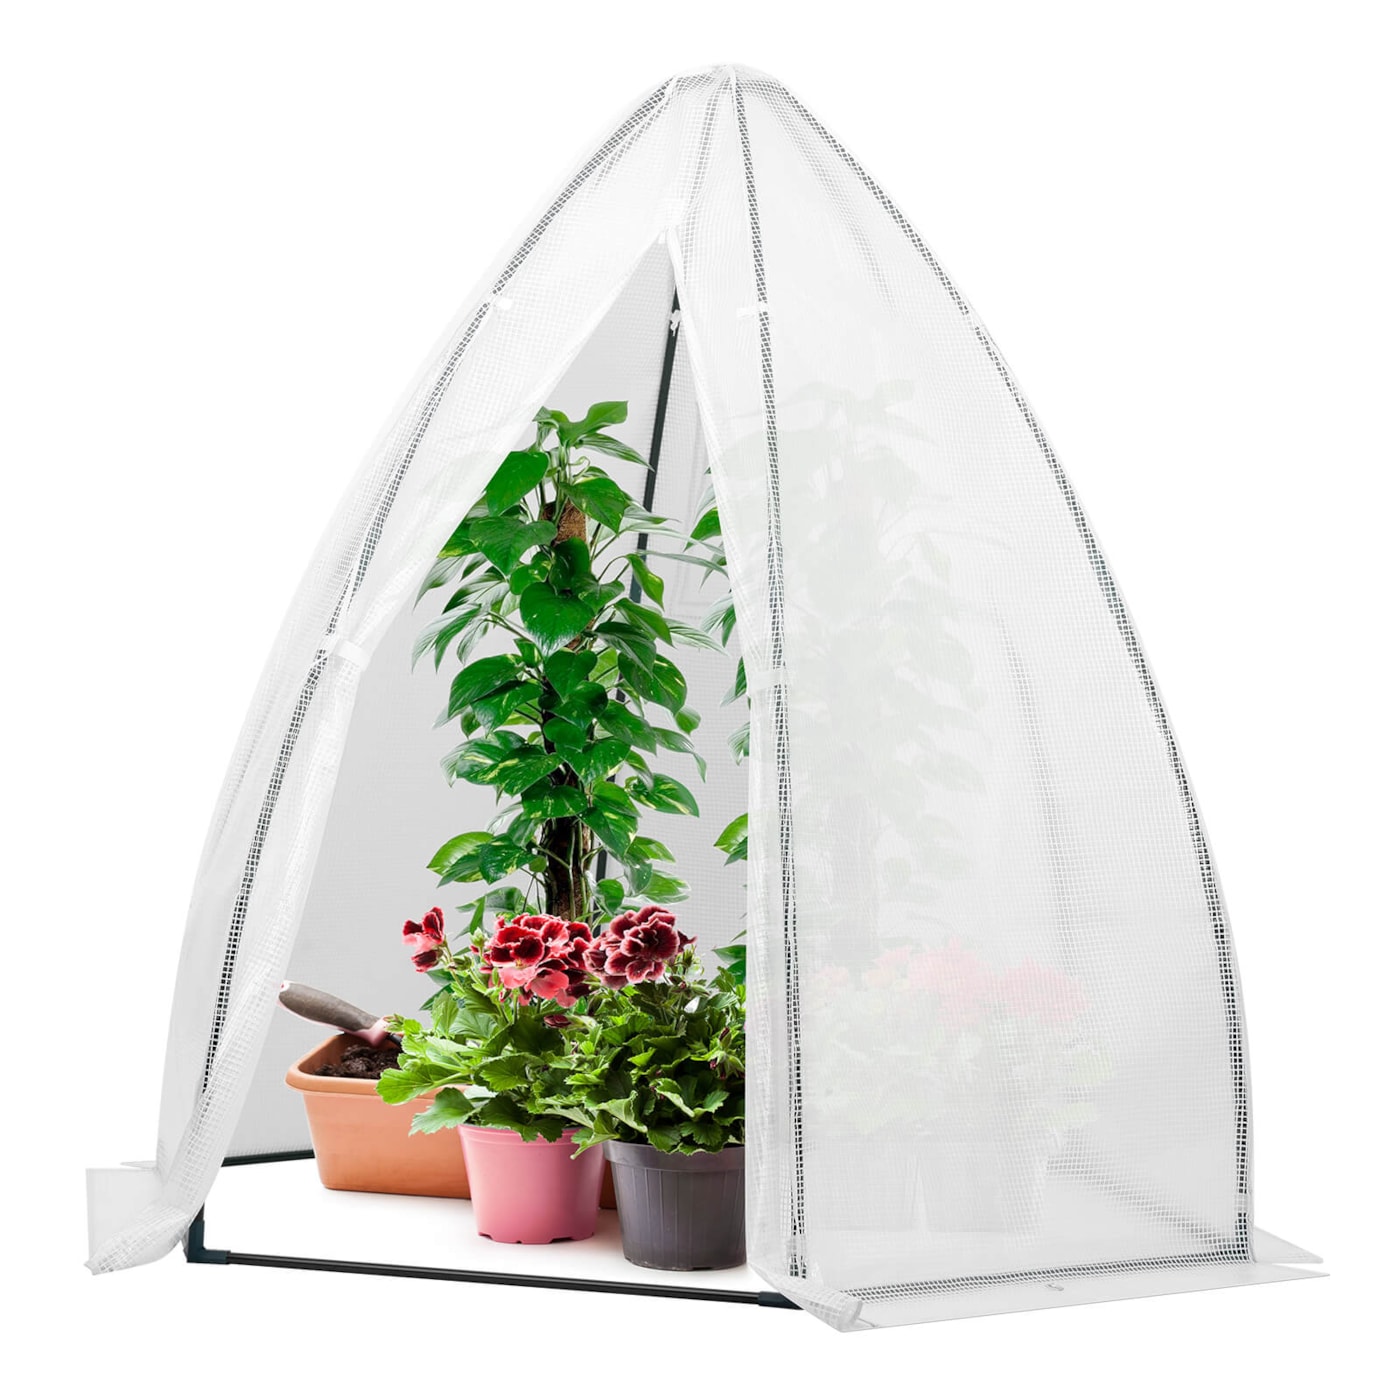 VIVOSUN Portable Mini Greenhouse 72x63x63-Inch Tent-Style Greenhouse, PE Cover with Roll-up Zipper Door and Window, for Indoor Outdoor or Garden Plant Growing, White